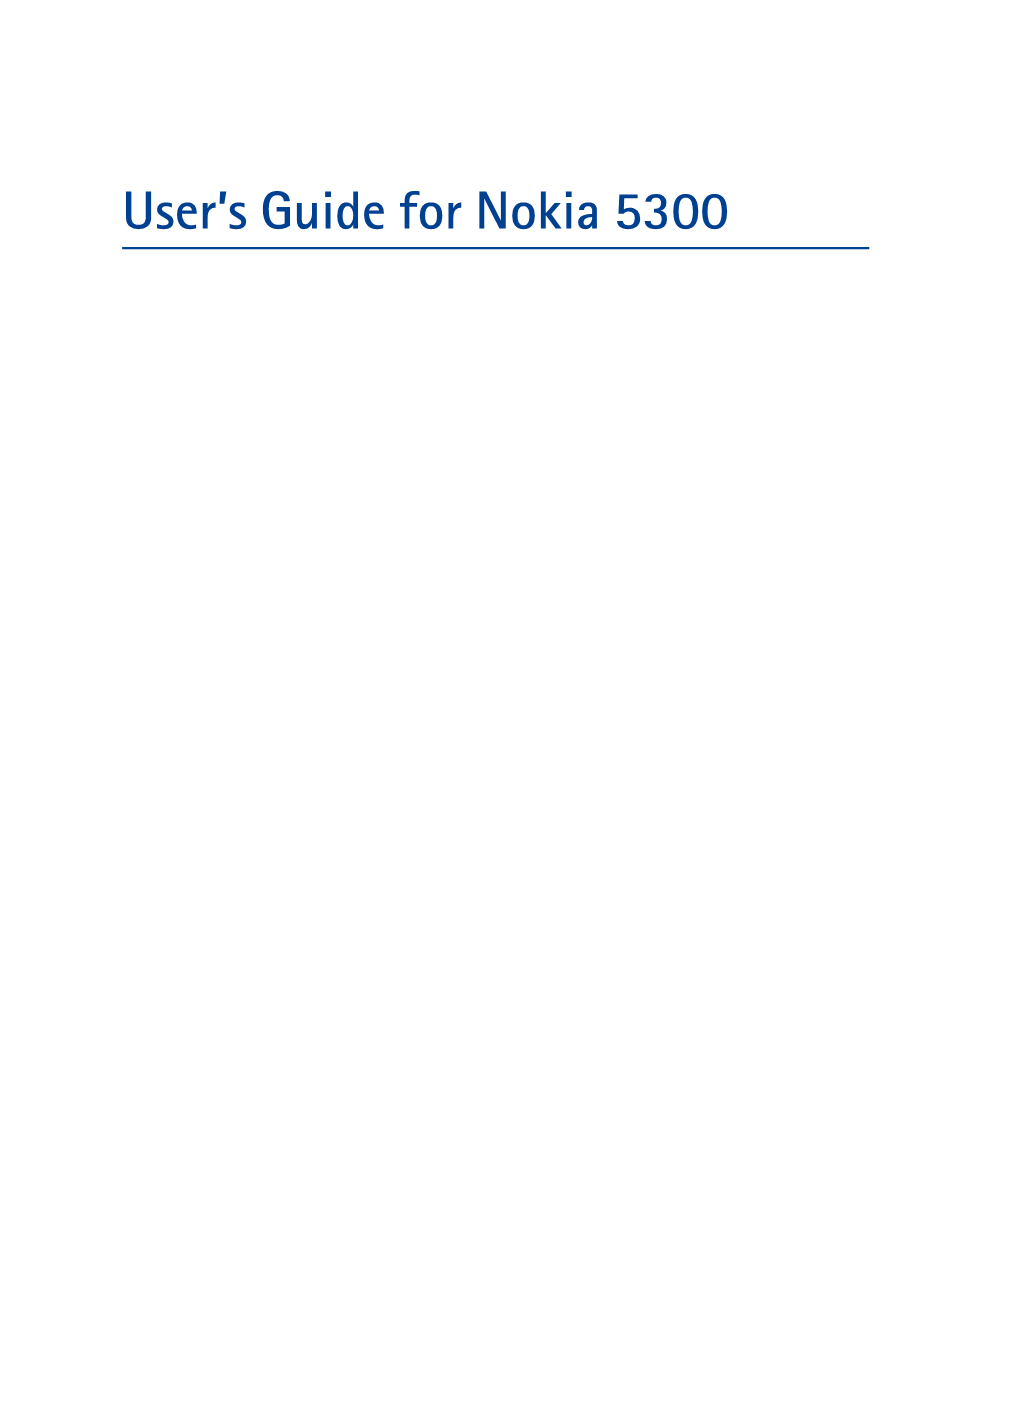 User's Guide for Nokia 5300